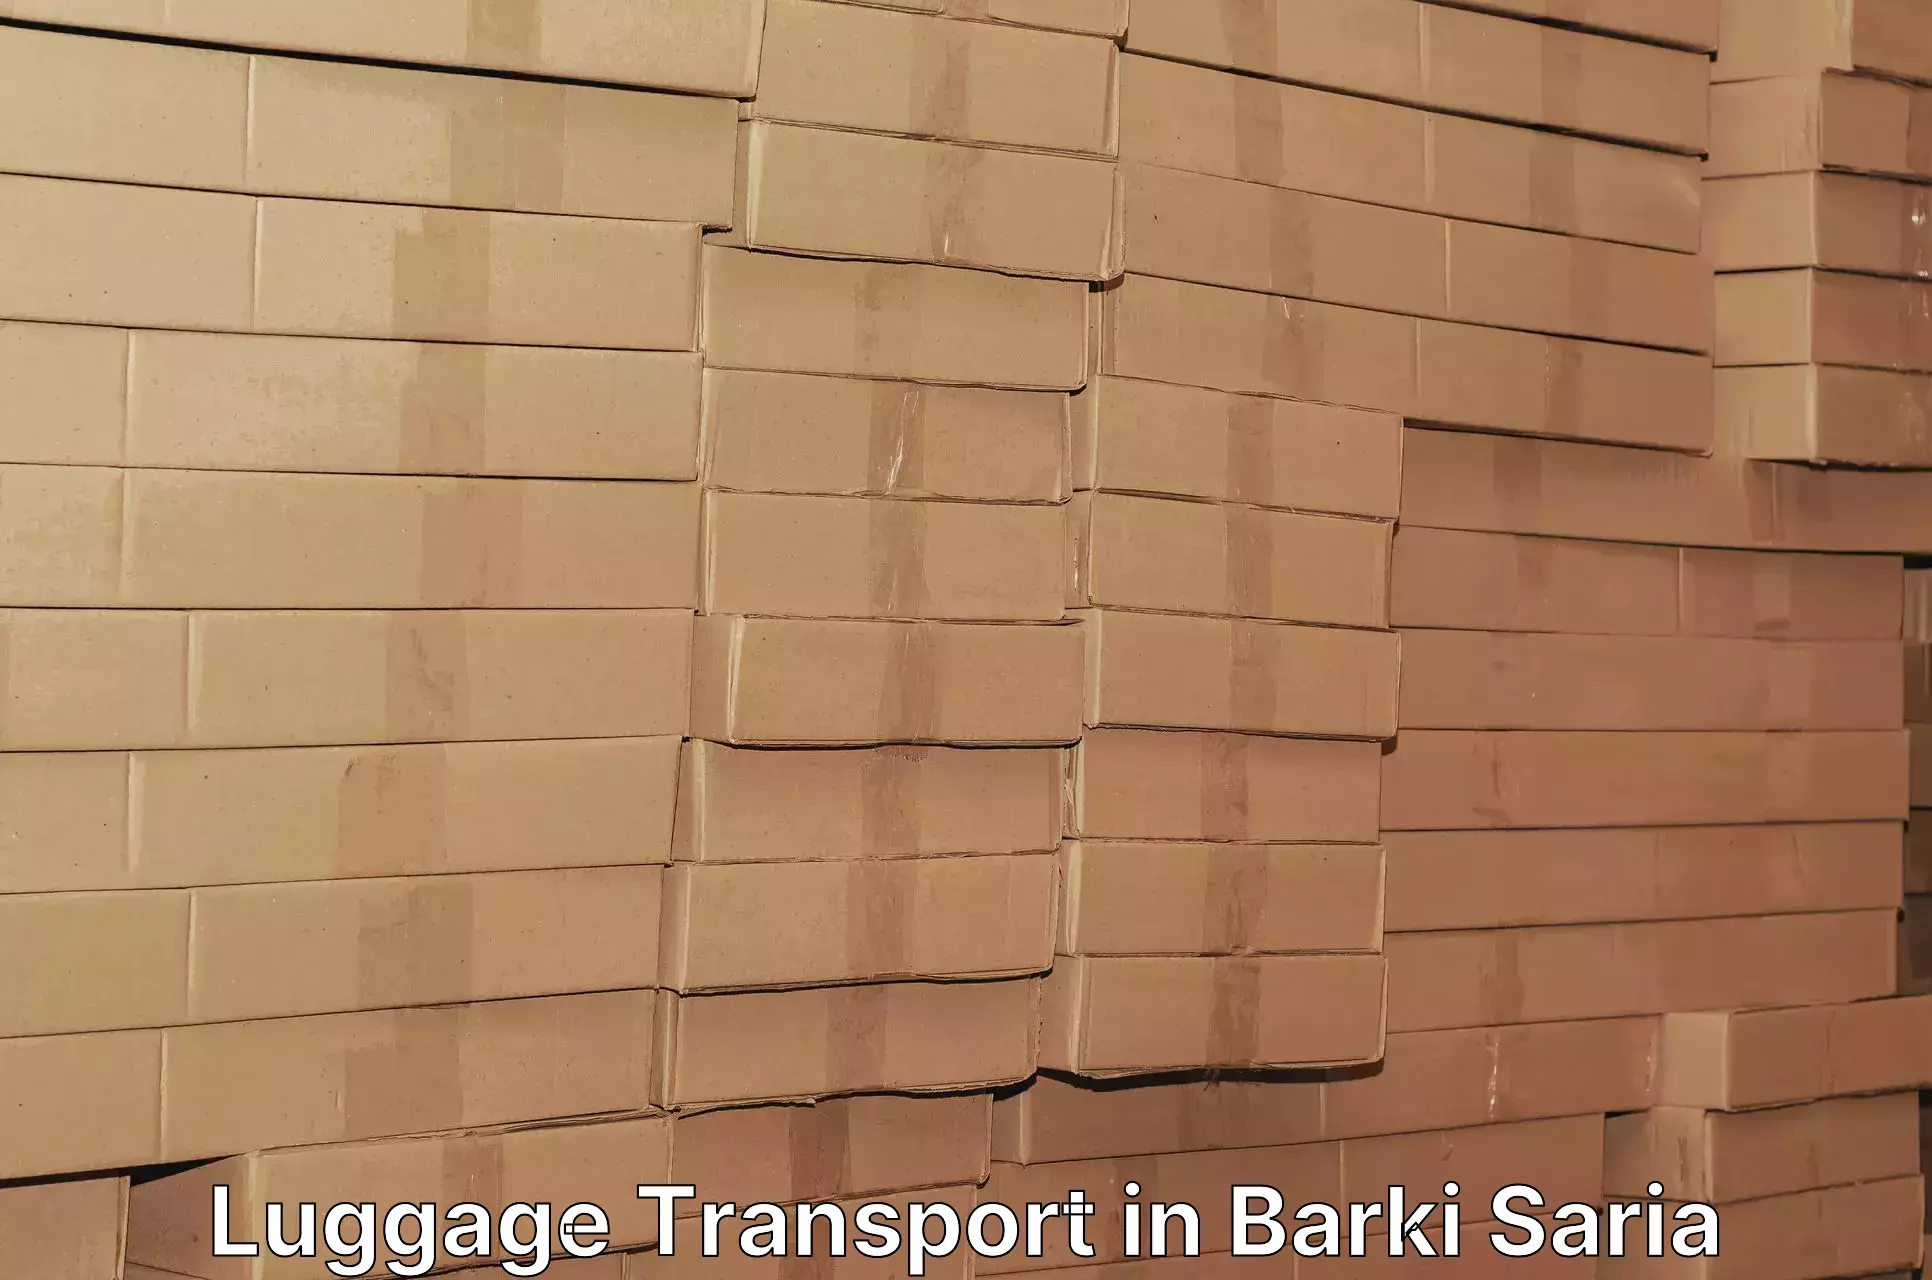 Luggage storage and delivery in Barki Saria